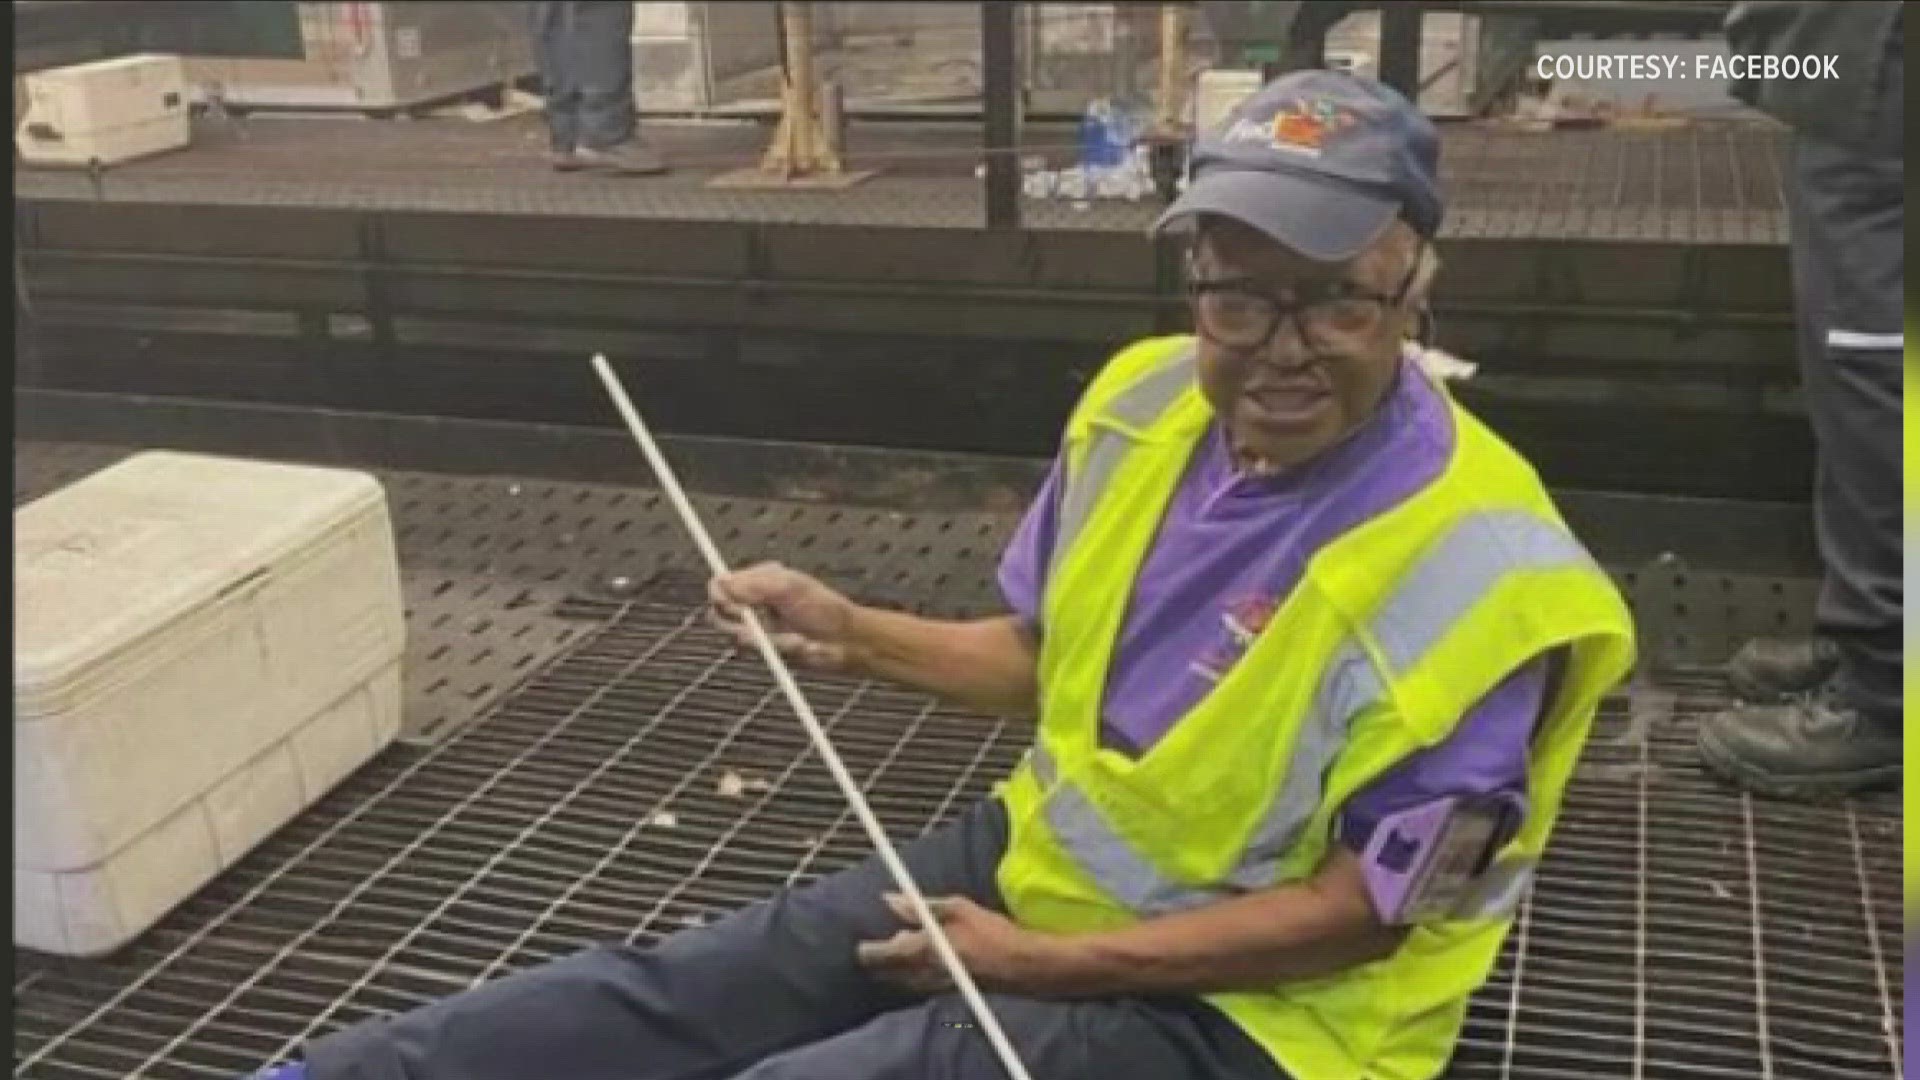 86-year-old Verna Mae Jackson has been identified as the employee killed in an accident at the FedEx World Hub in Memphis.